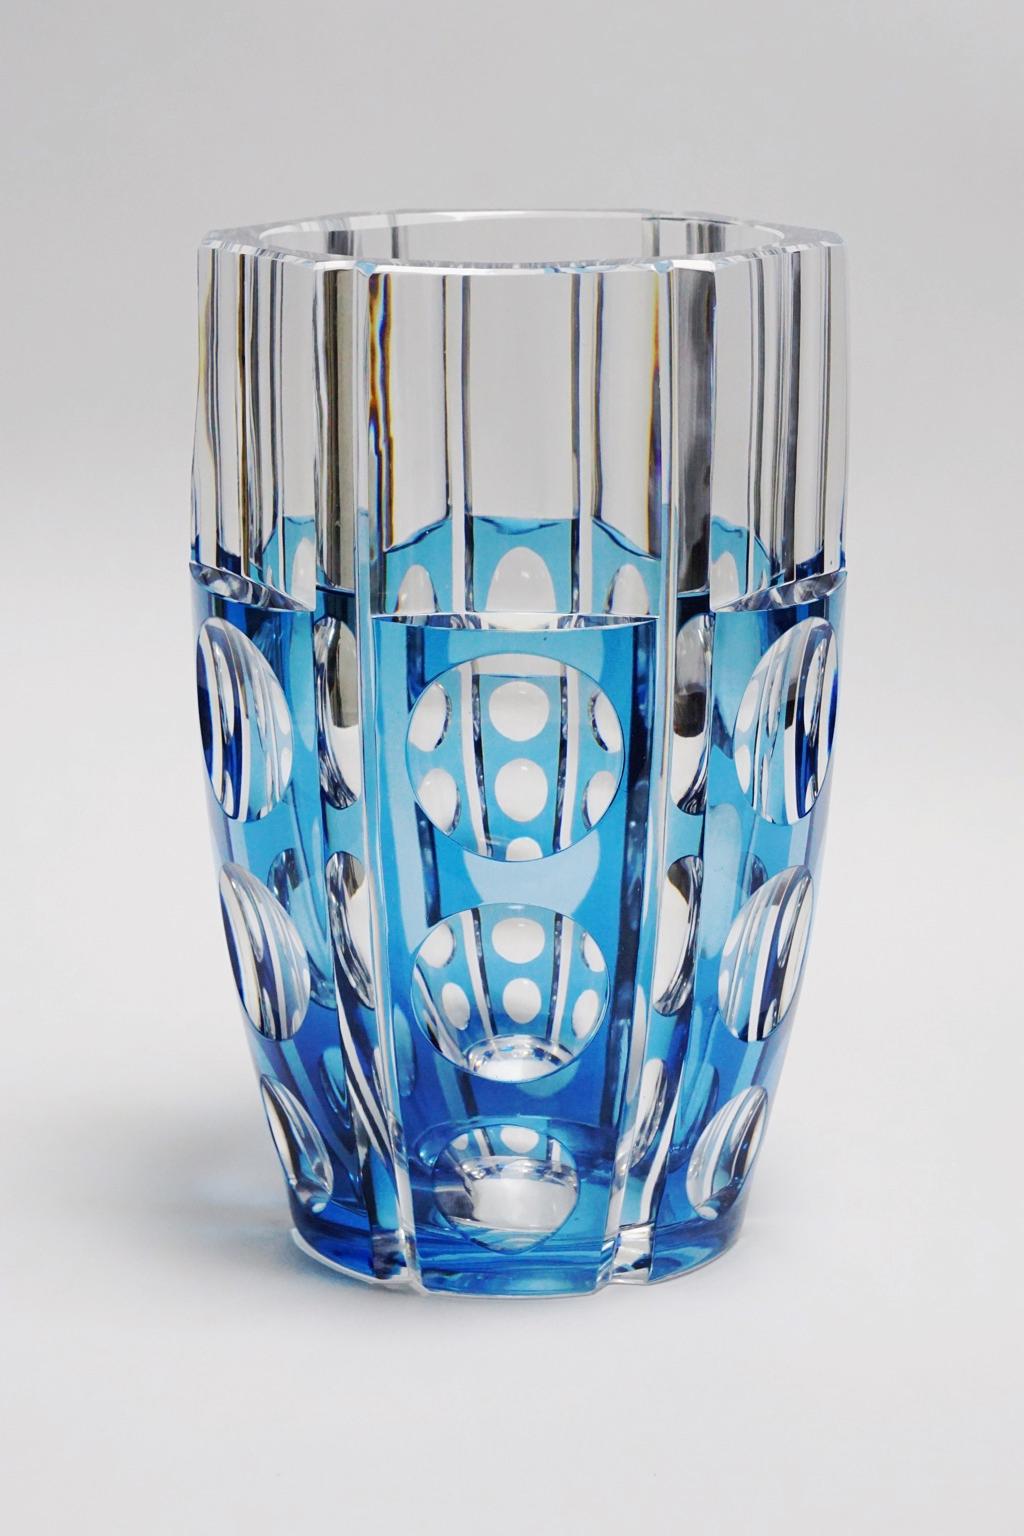 Hexagonal large Art Deco vase in thick glass flashed in light blue. “Cerbere” design by Charles Graffart (1883-1967), signed 